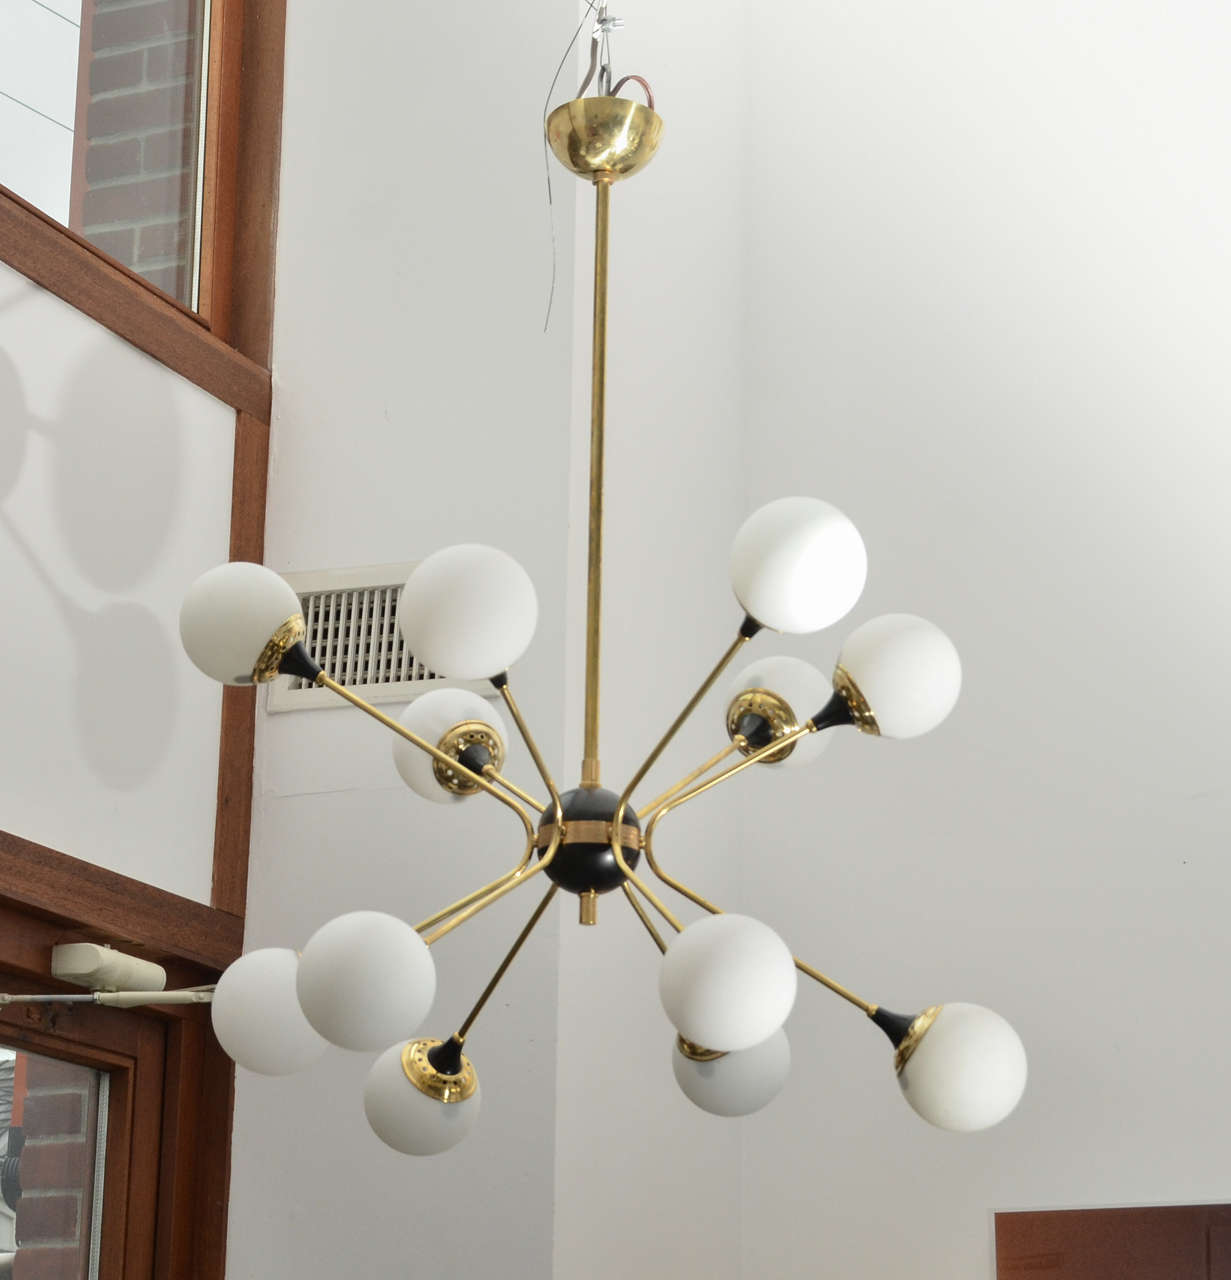 A black round sphere holding six bent brass arms ending with twelve handblown glass shades.